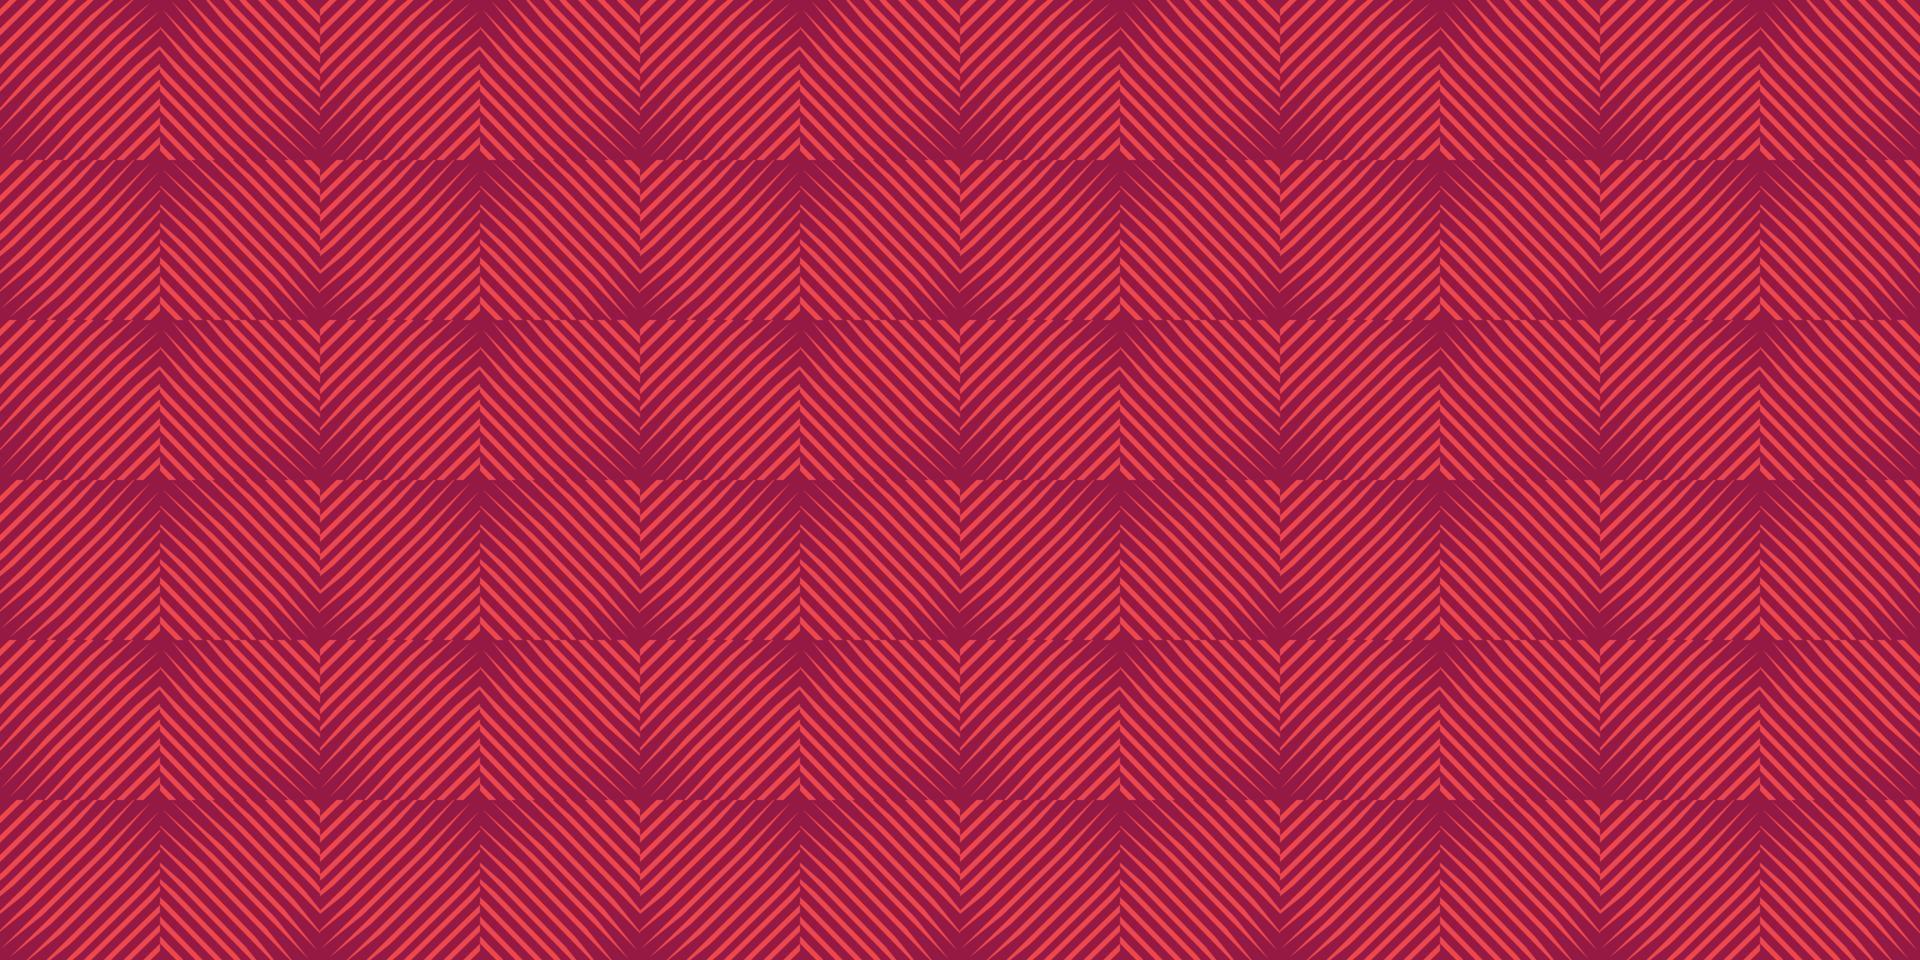 plaids fabric textile diagonal lines texture pattern seamless abstract background wallpaper paper art design vector illustration